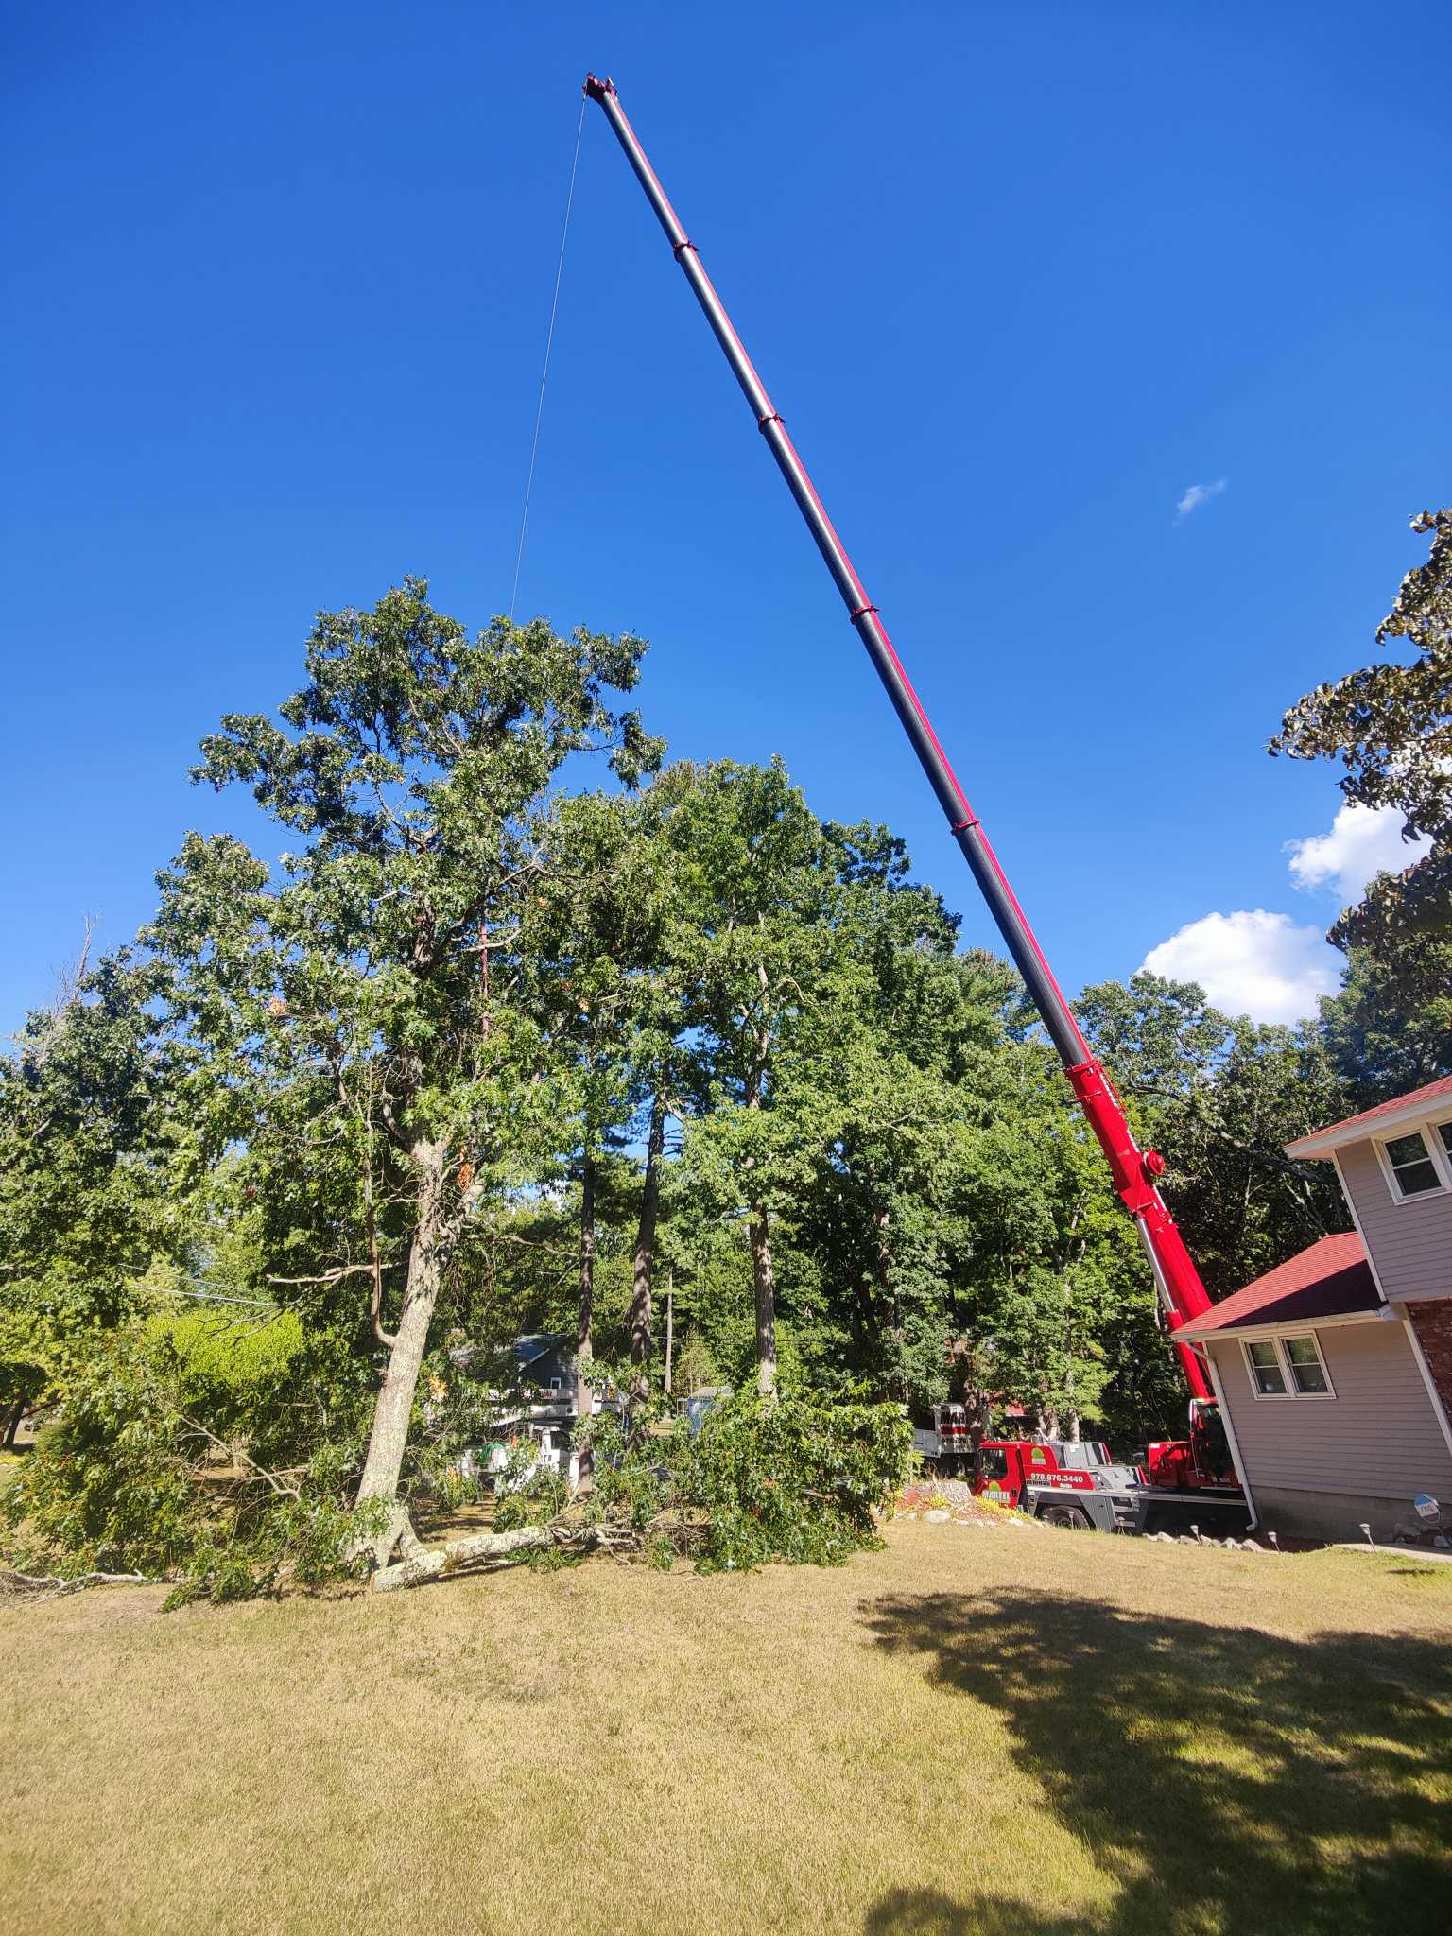 Tree Removal Service in Westford, MA.